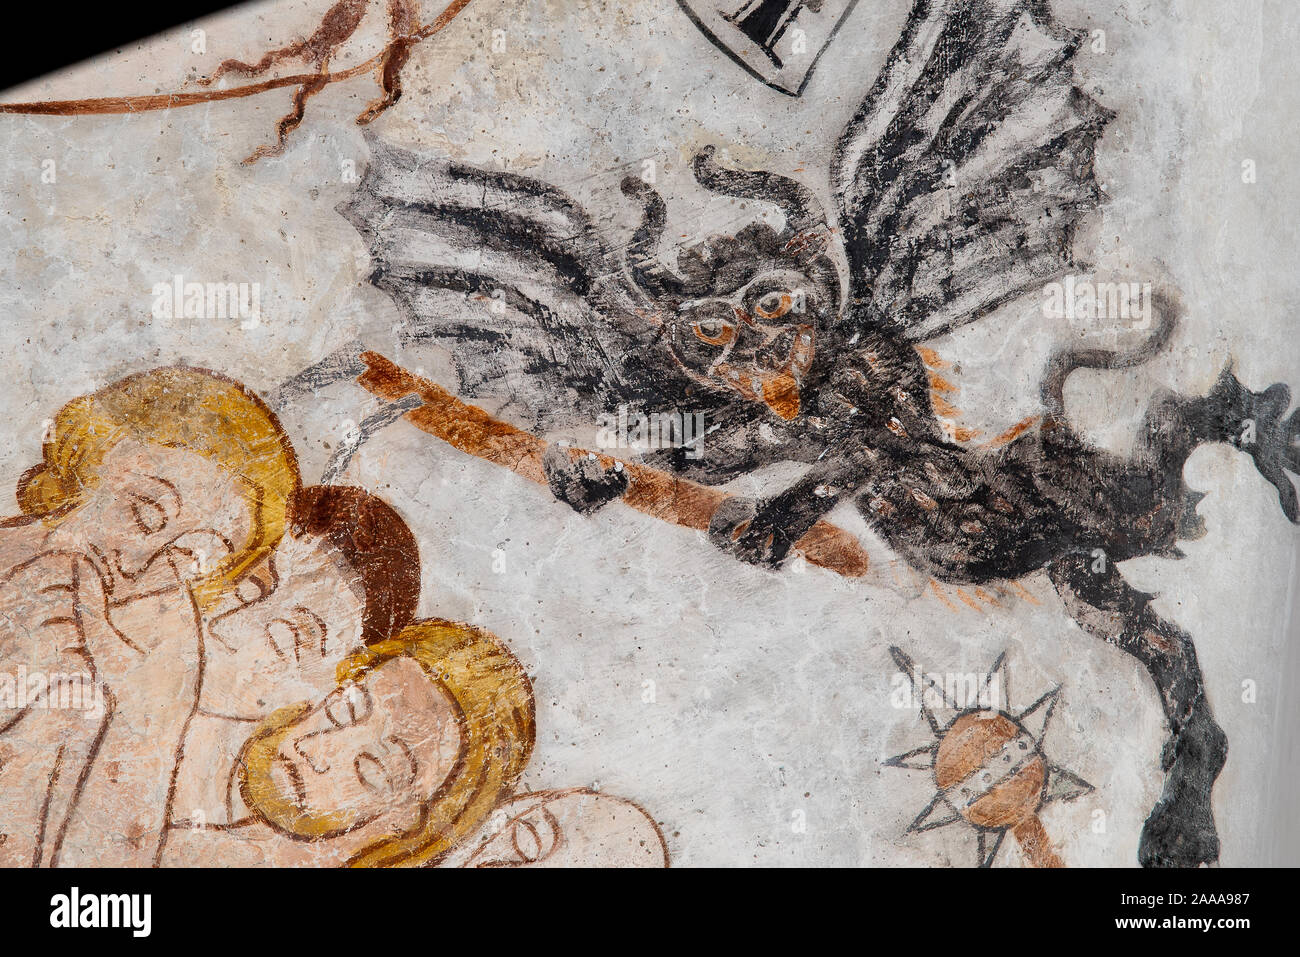 a flying devil with bat-wings attacks some people, a medieval fresco in Skibby church, Denmark, November 20, 2019 Stock Photo